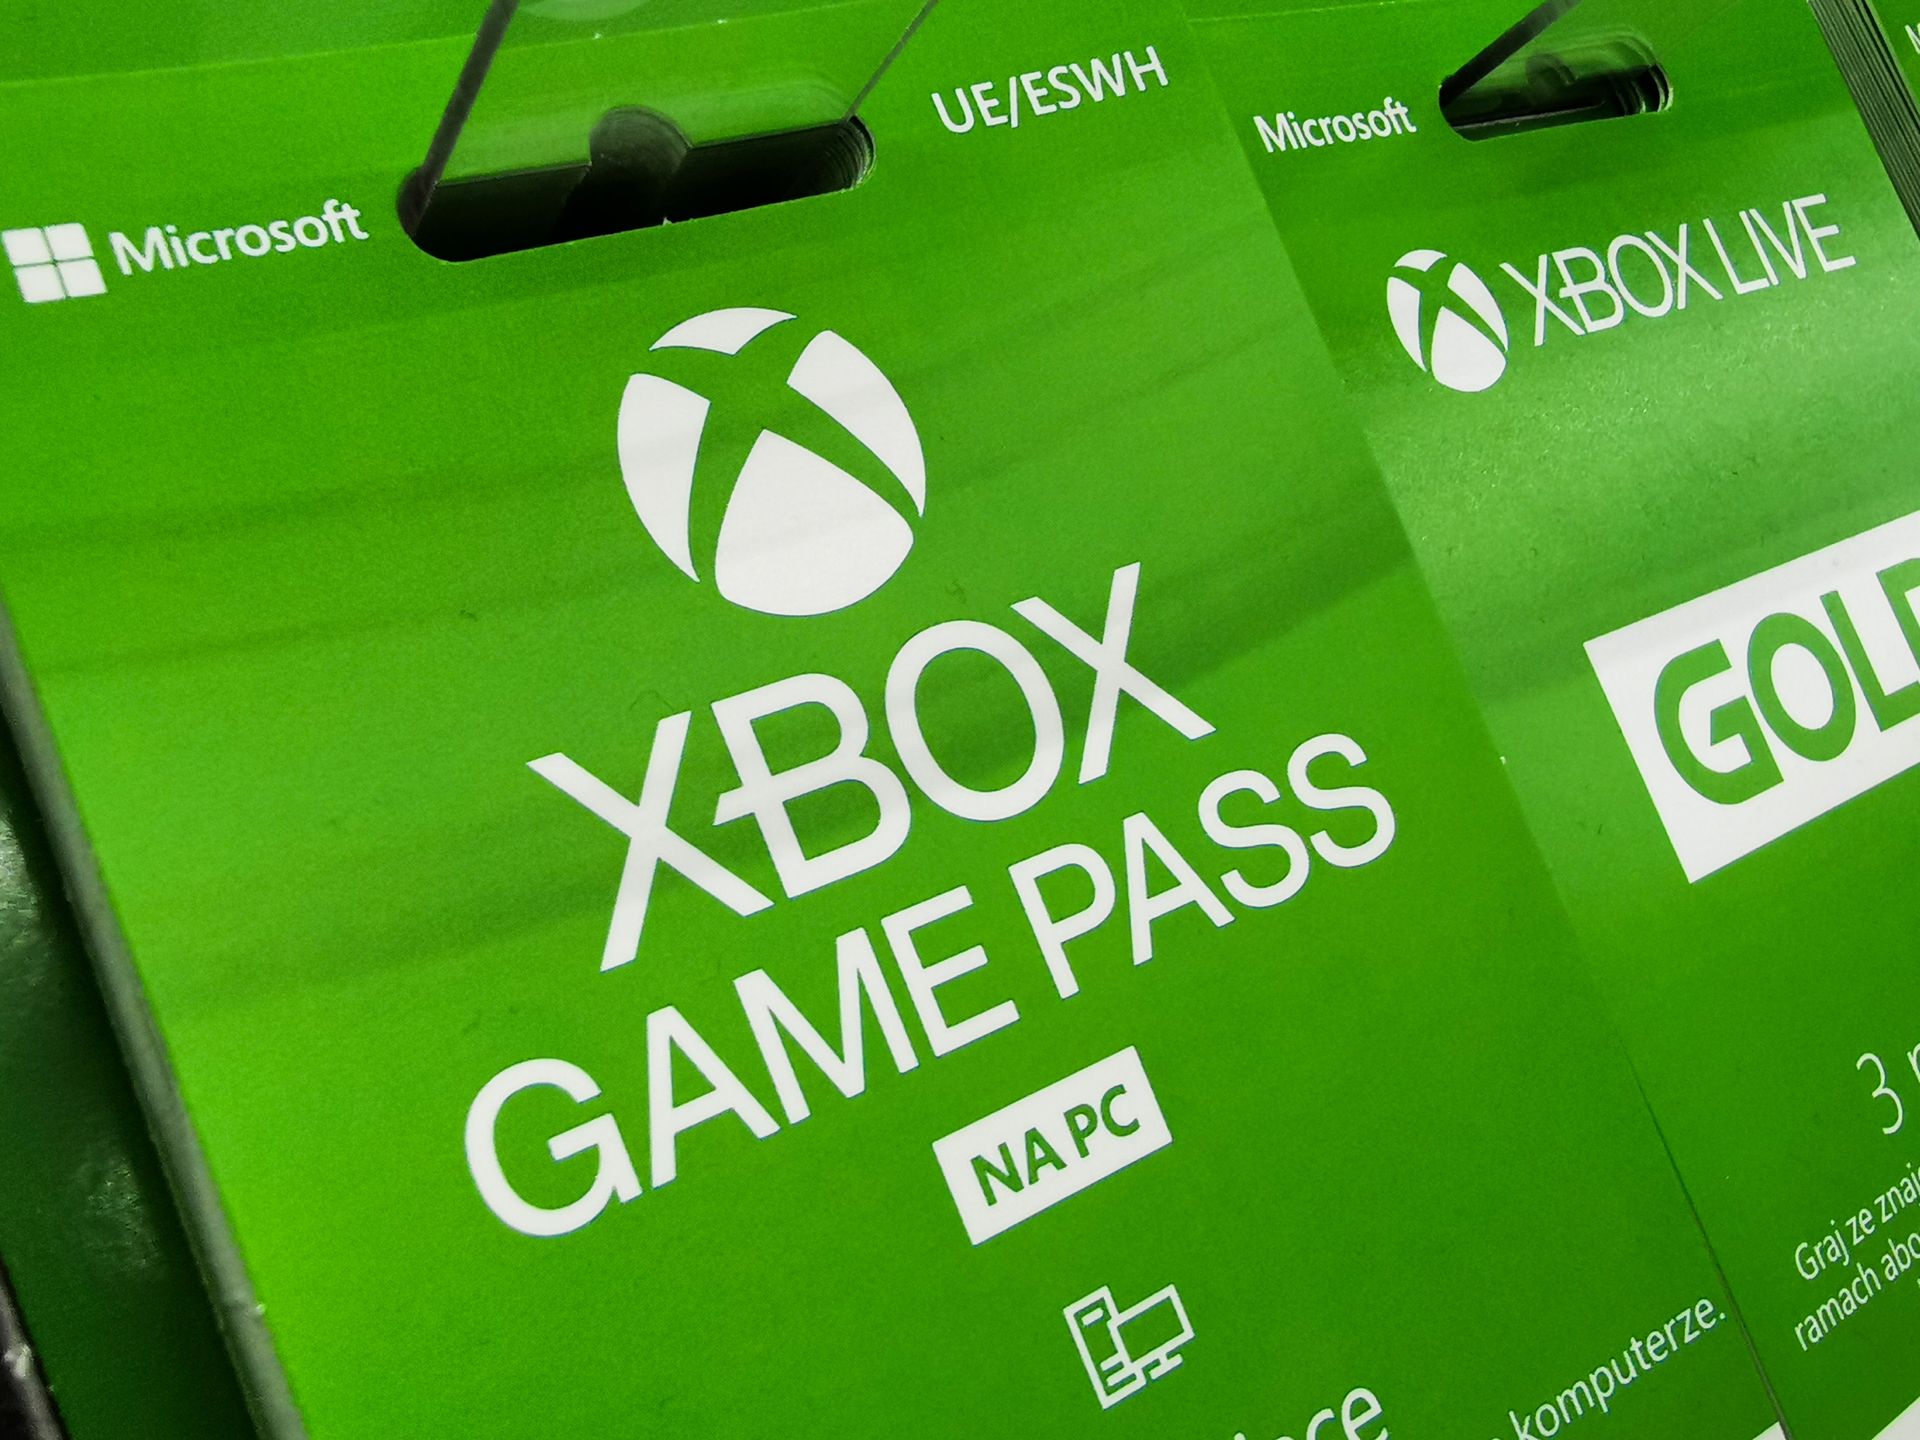 Xbox Game Pass Ultimate announced: $14.99 per month, coming in 2019 -  Polygon